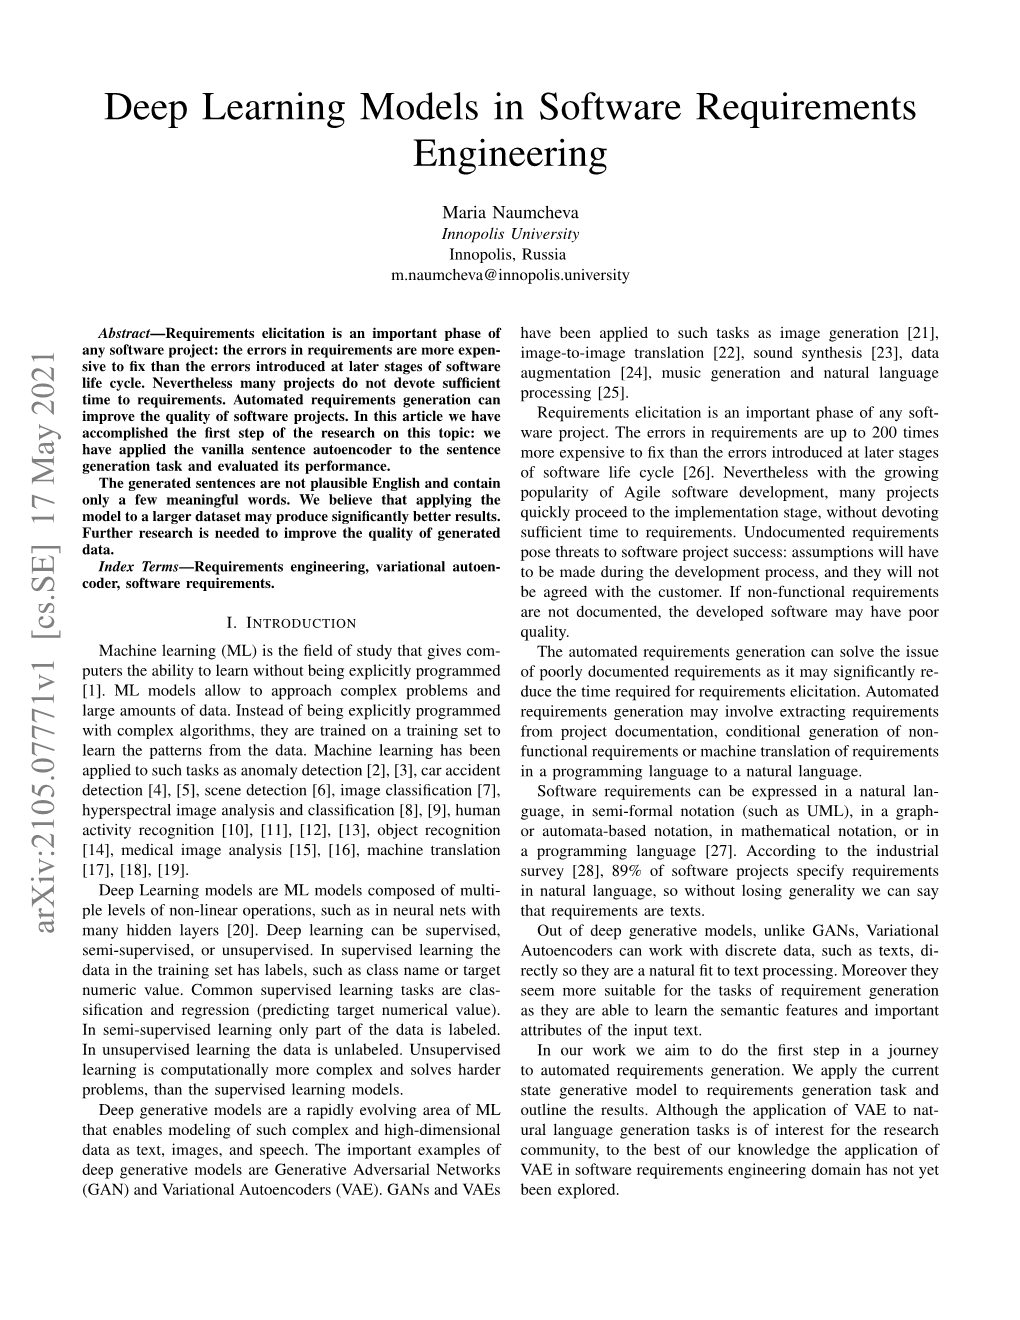 Deep Learning Models in Software Requirements Engineering